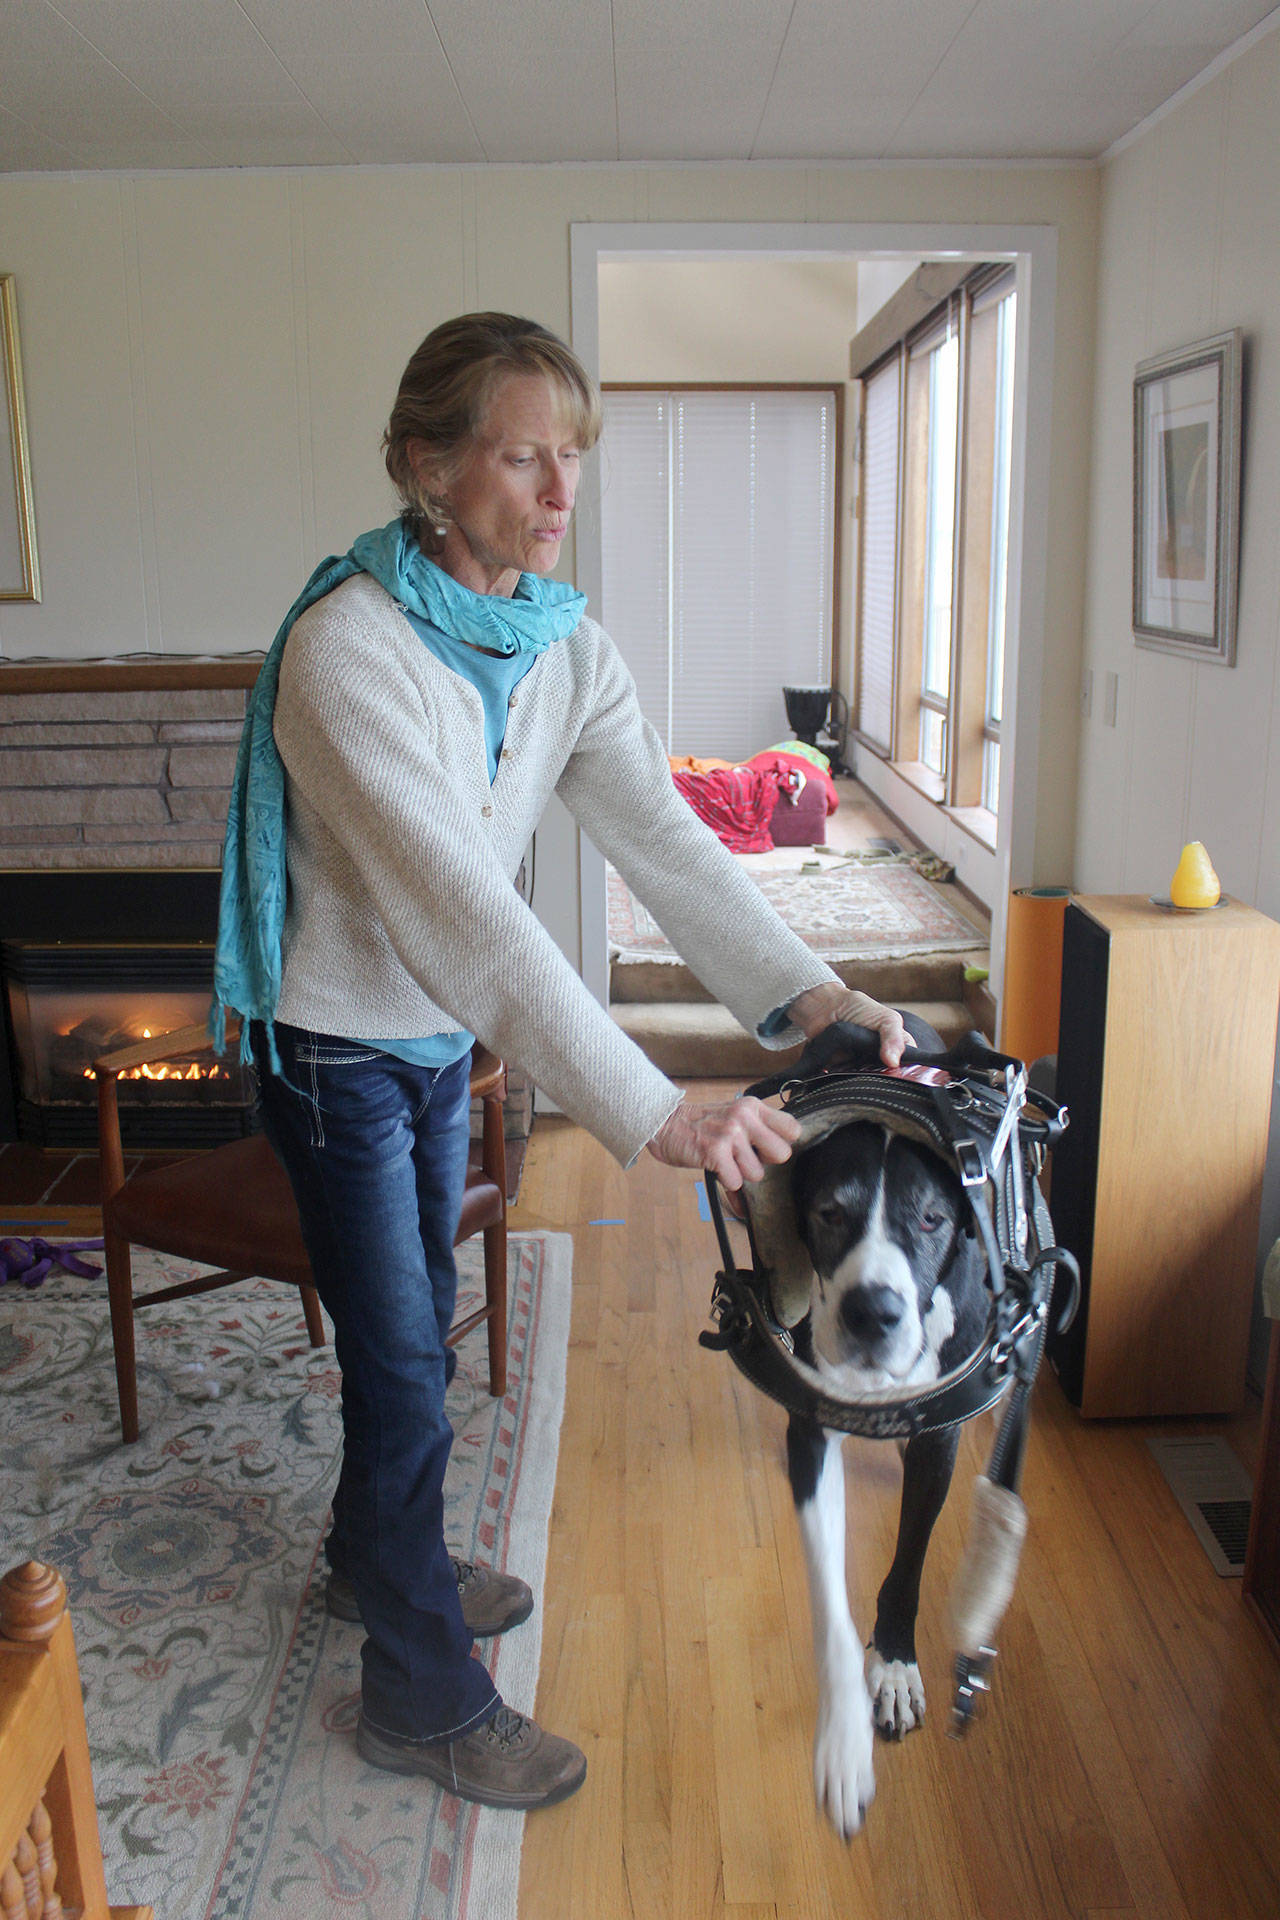 In the past few years, Great Danes started being trained as service dogs to help people with mobility issues. Here Renee Le Verrier has Tommy walk into his harness. He helps steady her and get up from low places. Photo by Patricia Guthrie/Whidbey News-Times